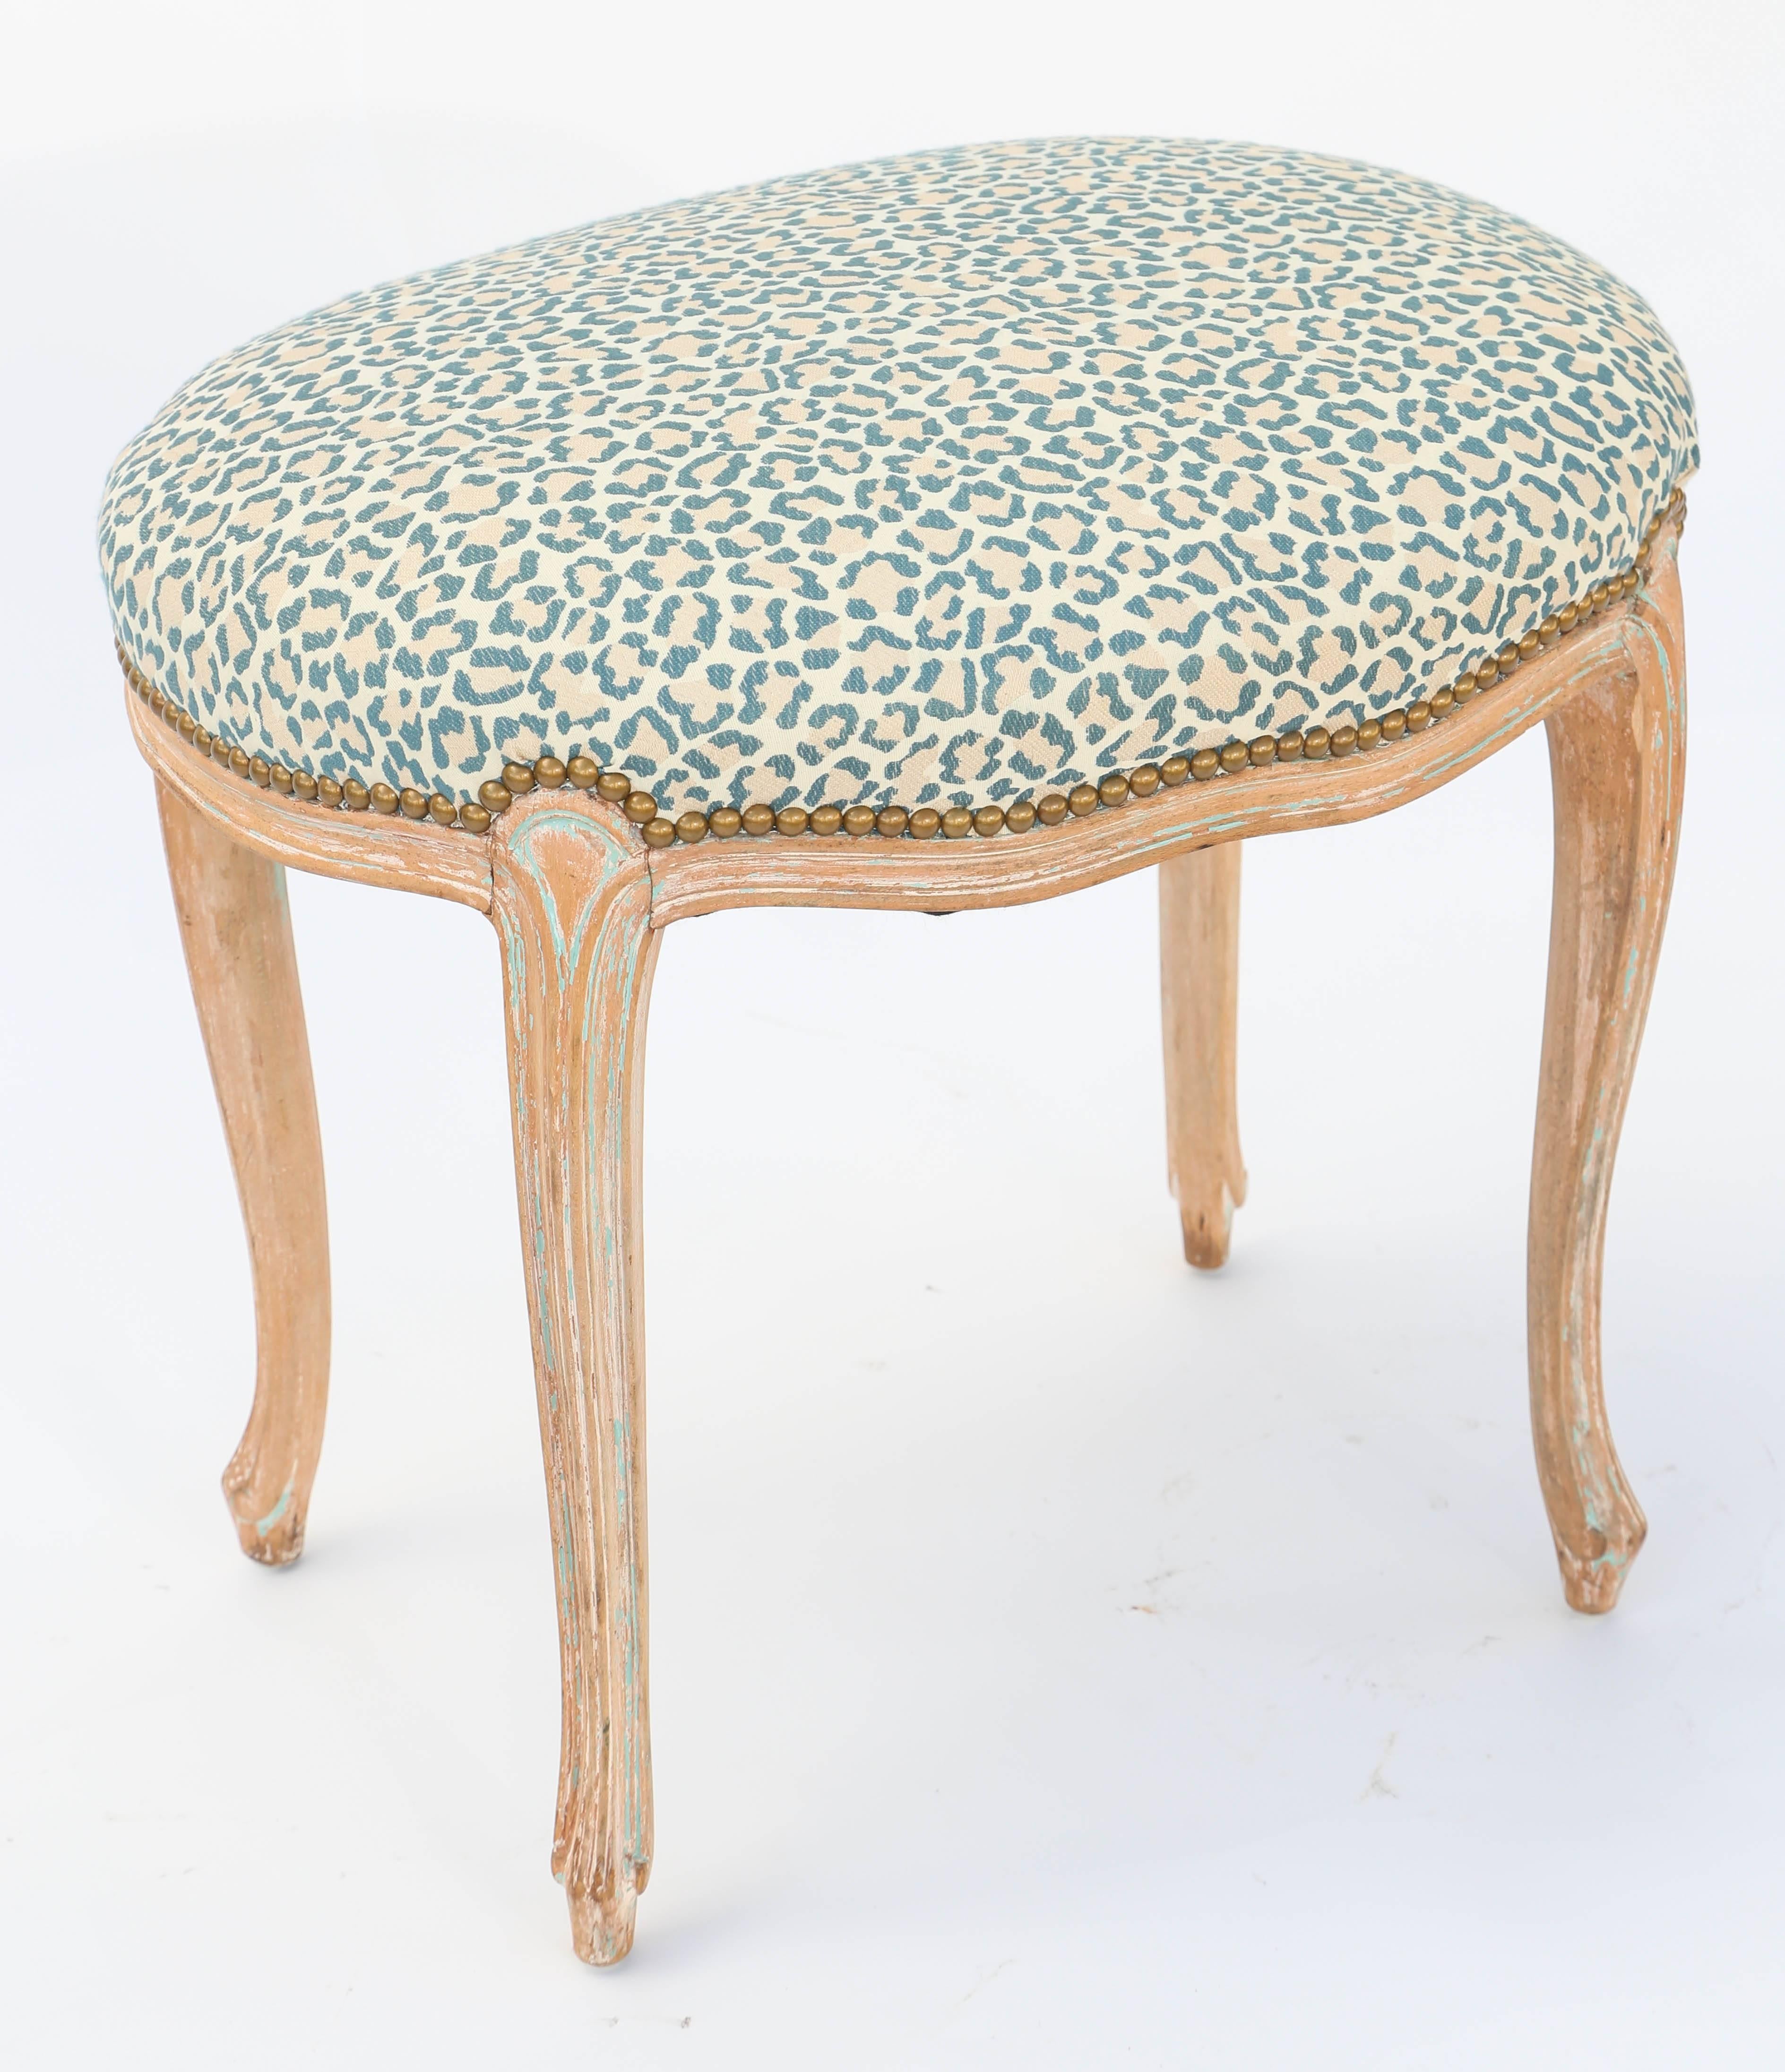 Oval stool, having a crown seat in leopard-print fabric, finished with nailheads, on a frame with a pickled, natural wood finish, its channelled apron, raised on slight cabriole legs, ending in touipe feet.

Stock ID: D9423